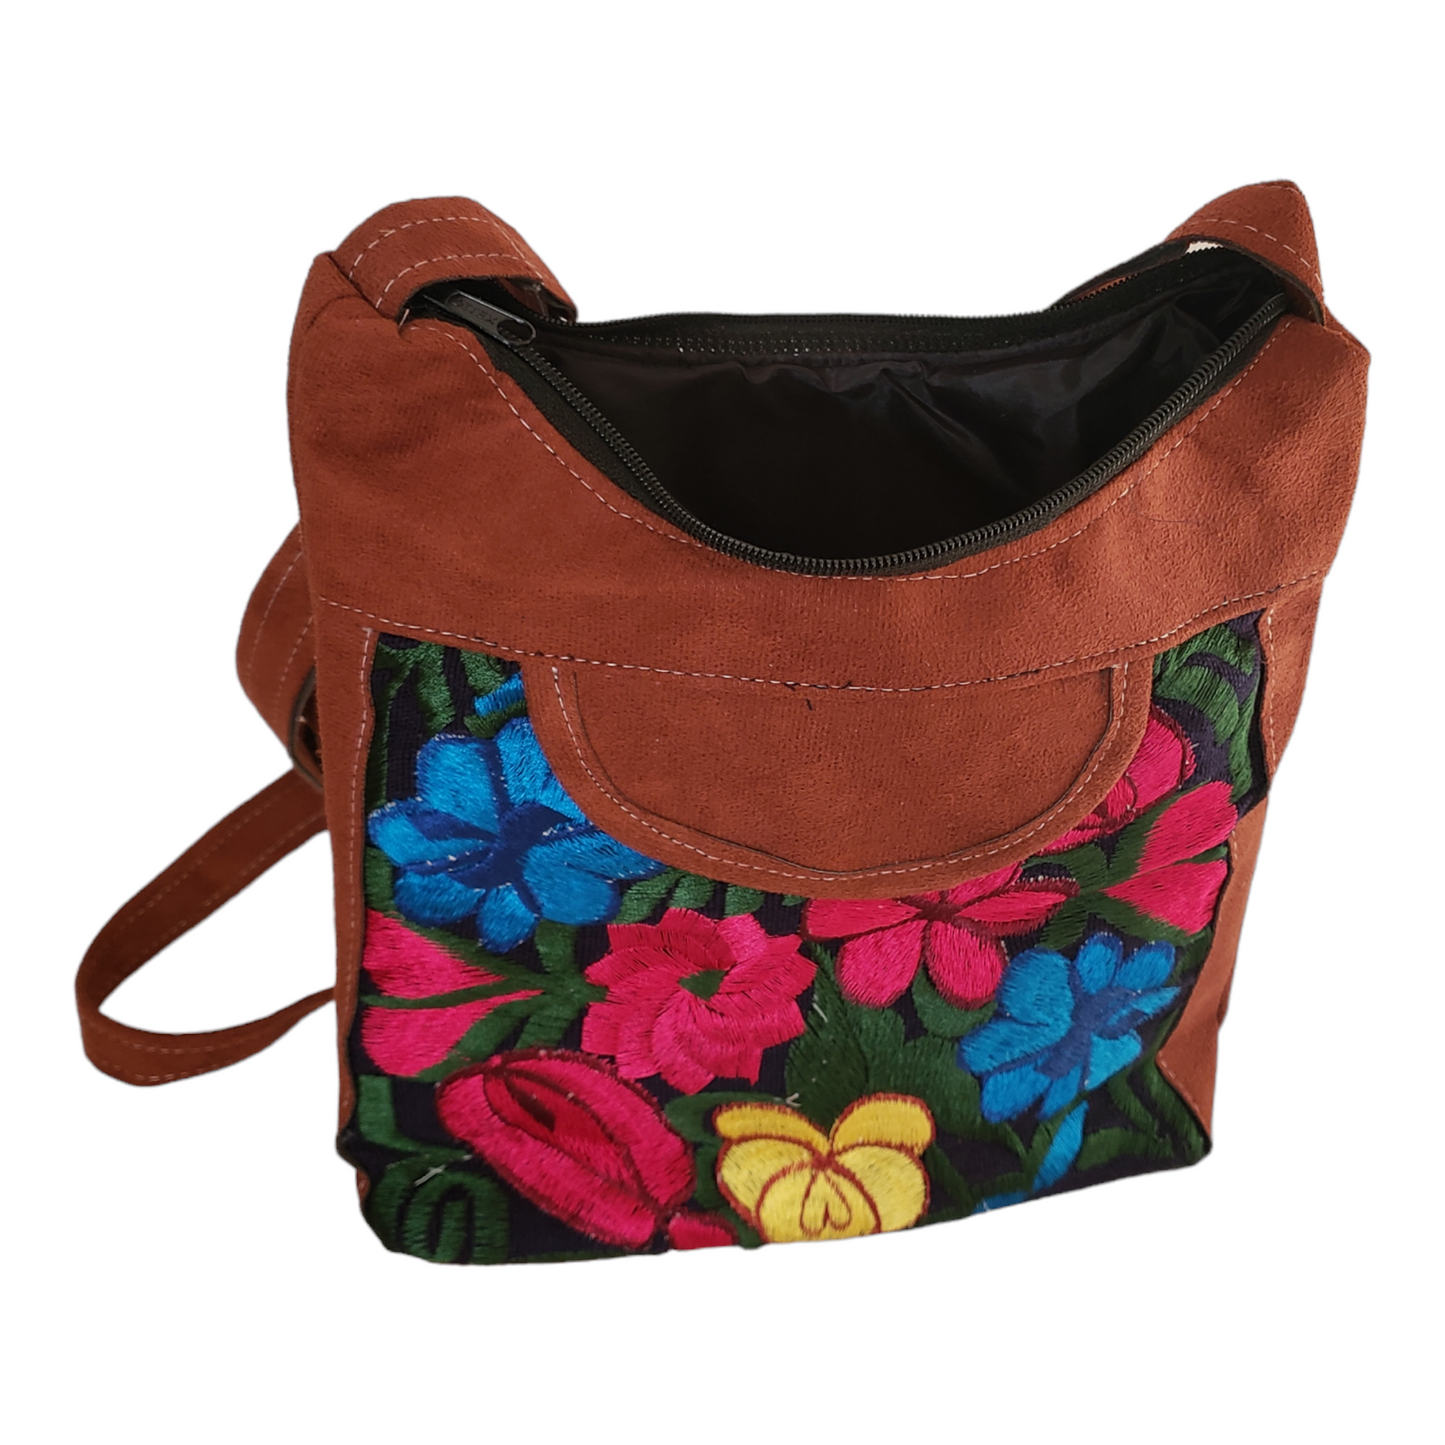 Mexican Embroidered Floral Leather Bag Shoulder Crossbody